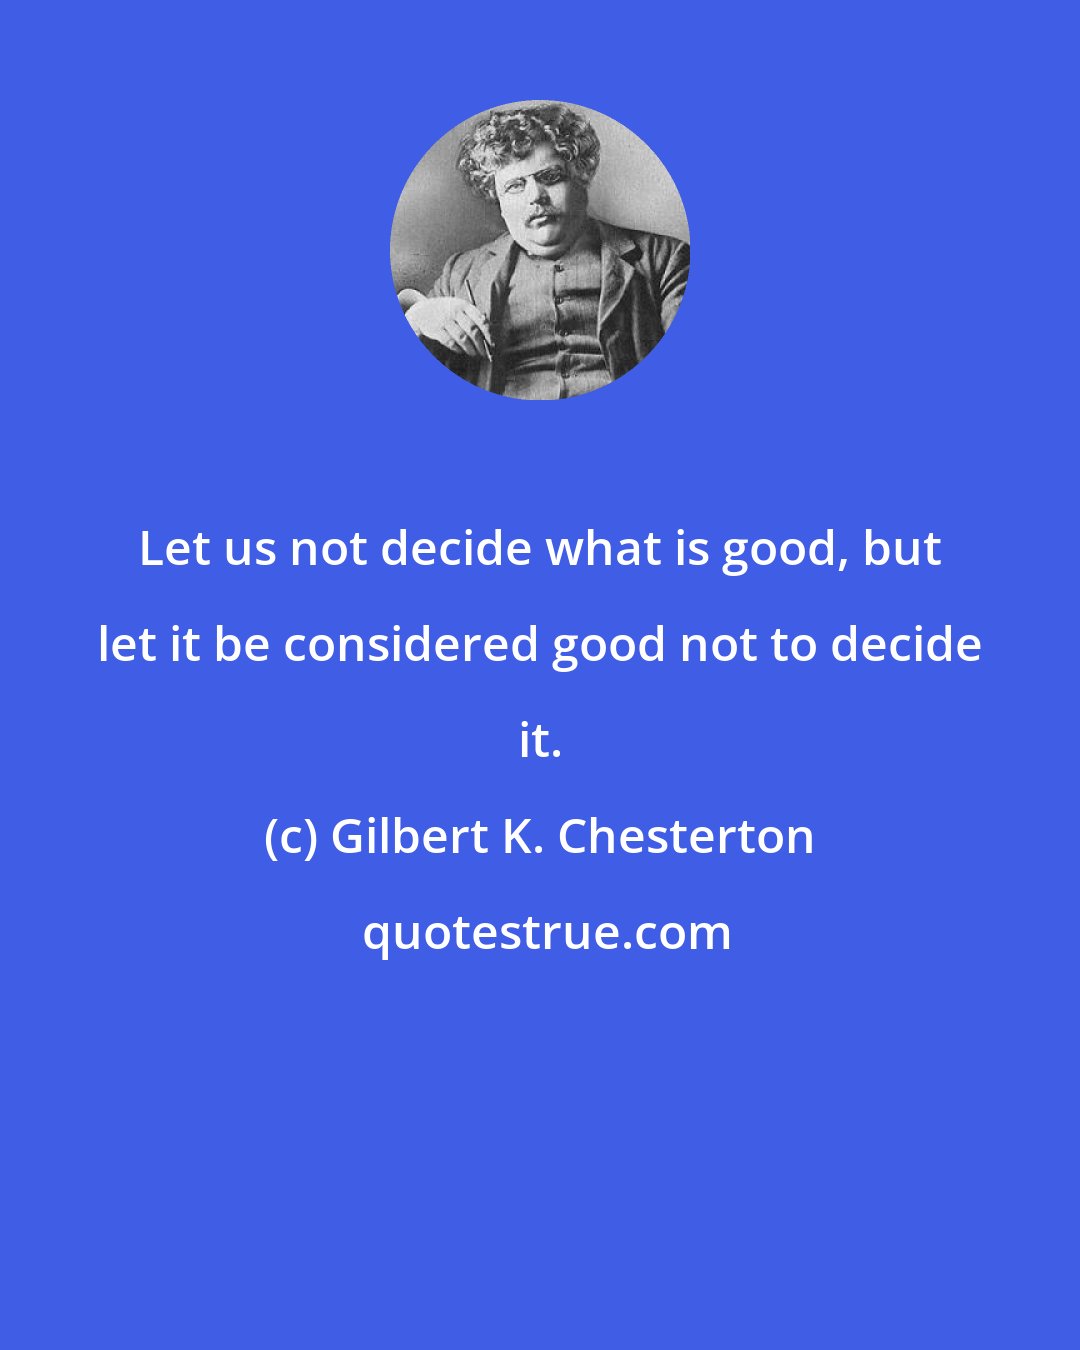 Gilbert K. Chesterton: Let us not decide what is good, but let it be considered good not to decide it.